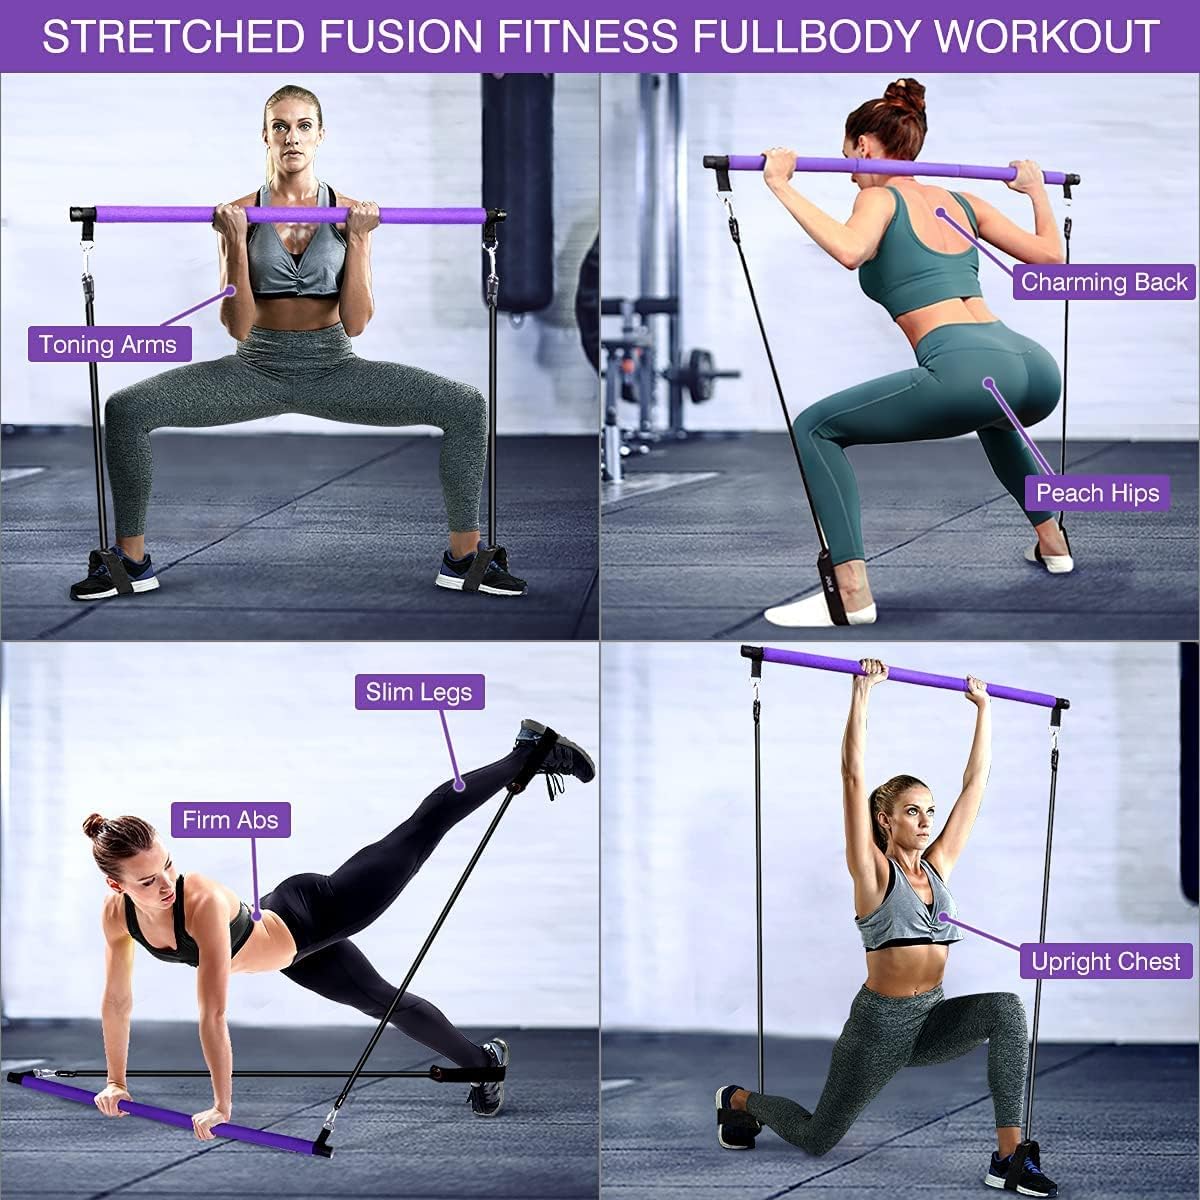 Home Exercise Starter Kit: Multifunctional Pilates Bar with Resistance  Bands - Compact, Portable Full-Body Workout Equipment for All Fitness Levels